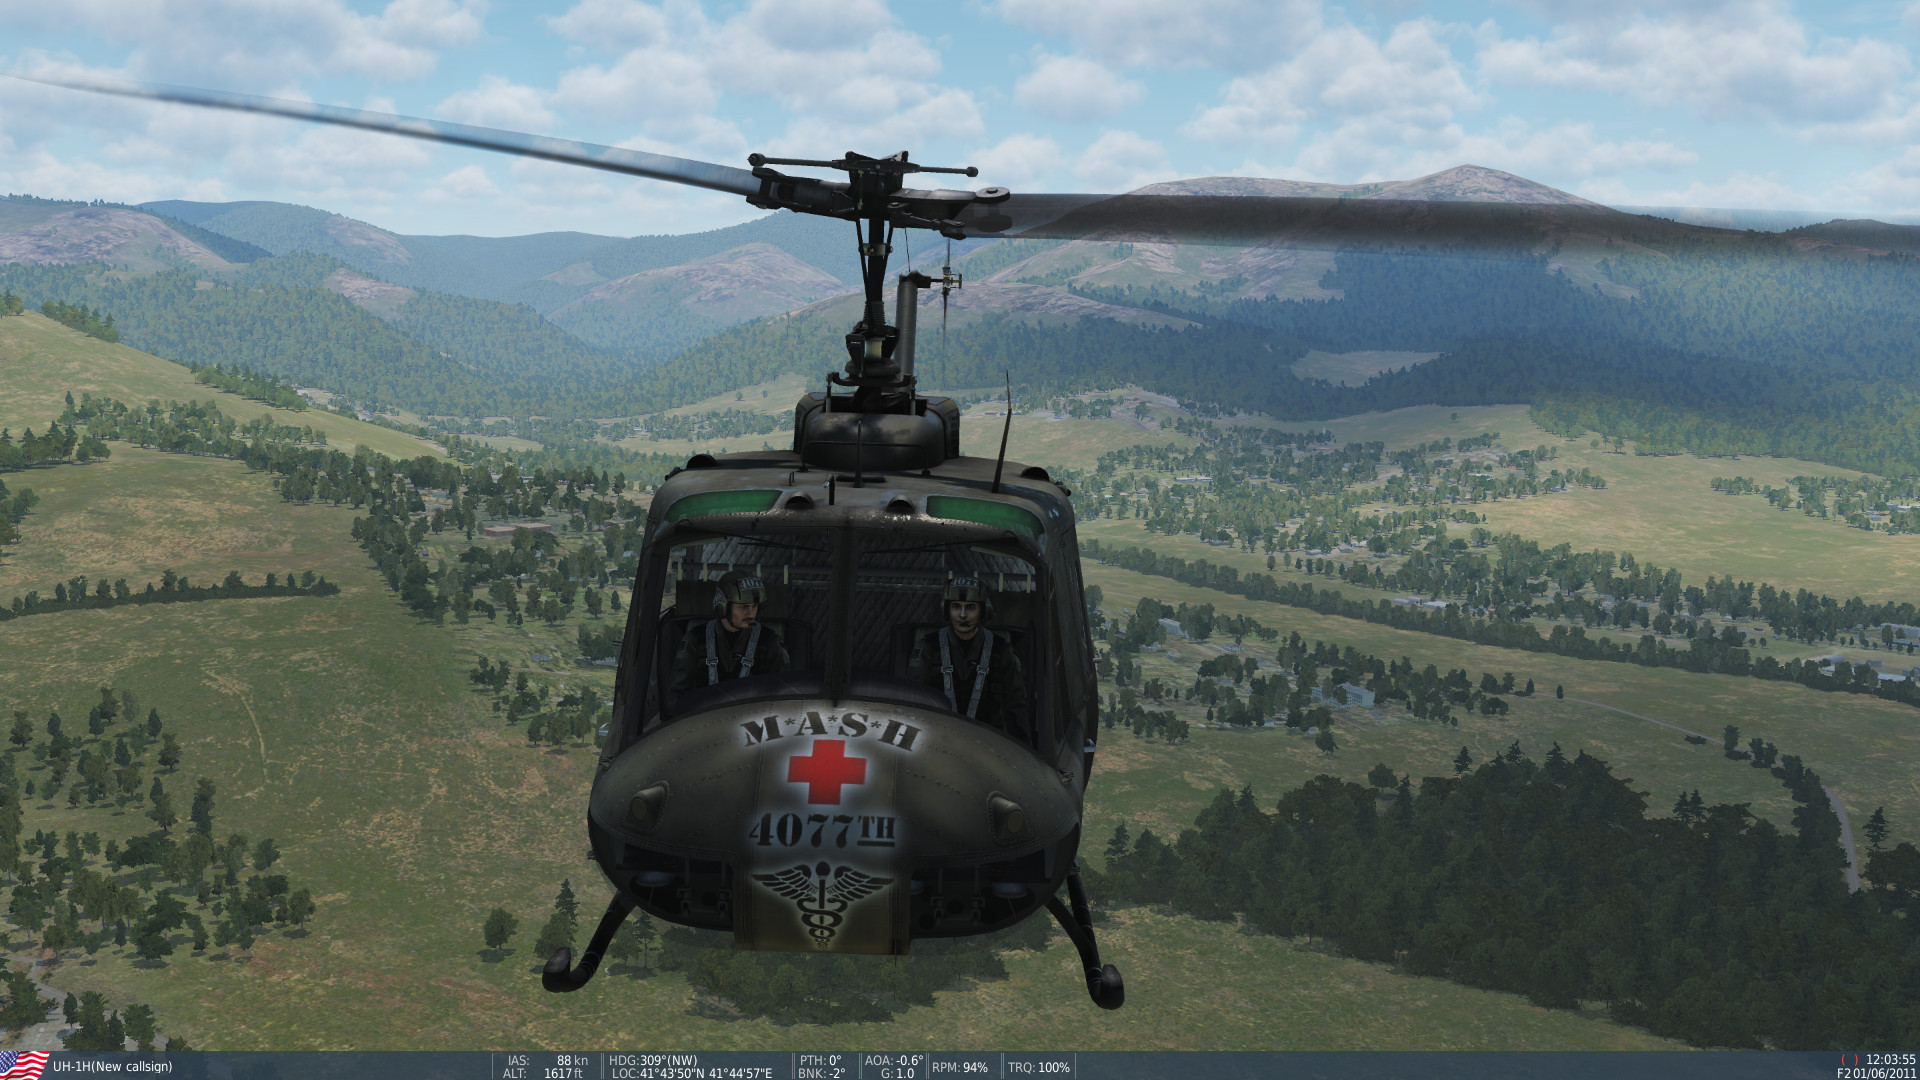 UH-1H " M*A*S*H 4077th" Huey **UPDATED COCKPIT** 7-23-20